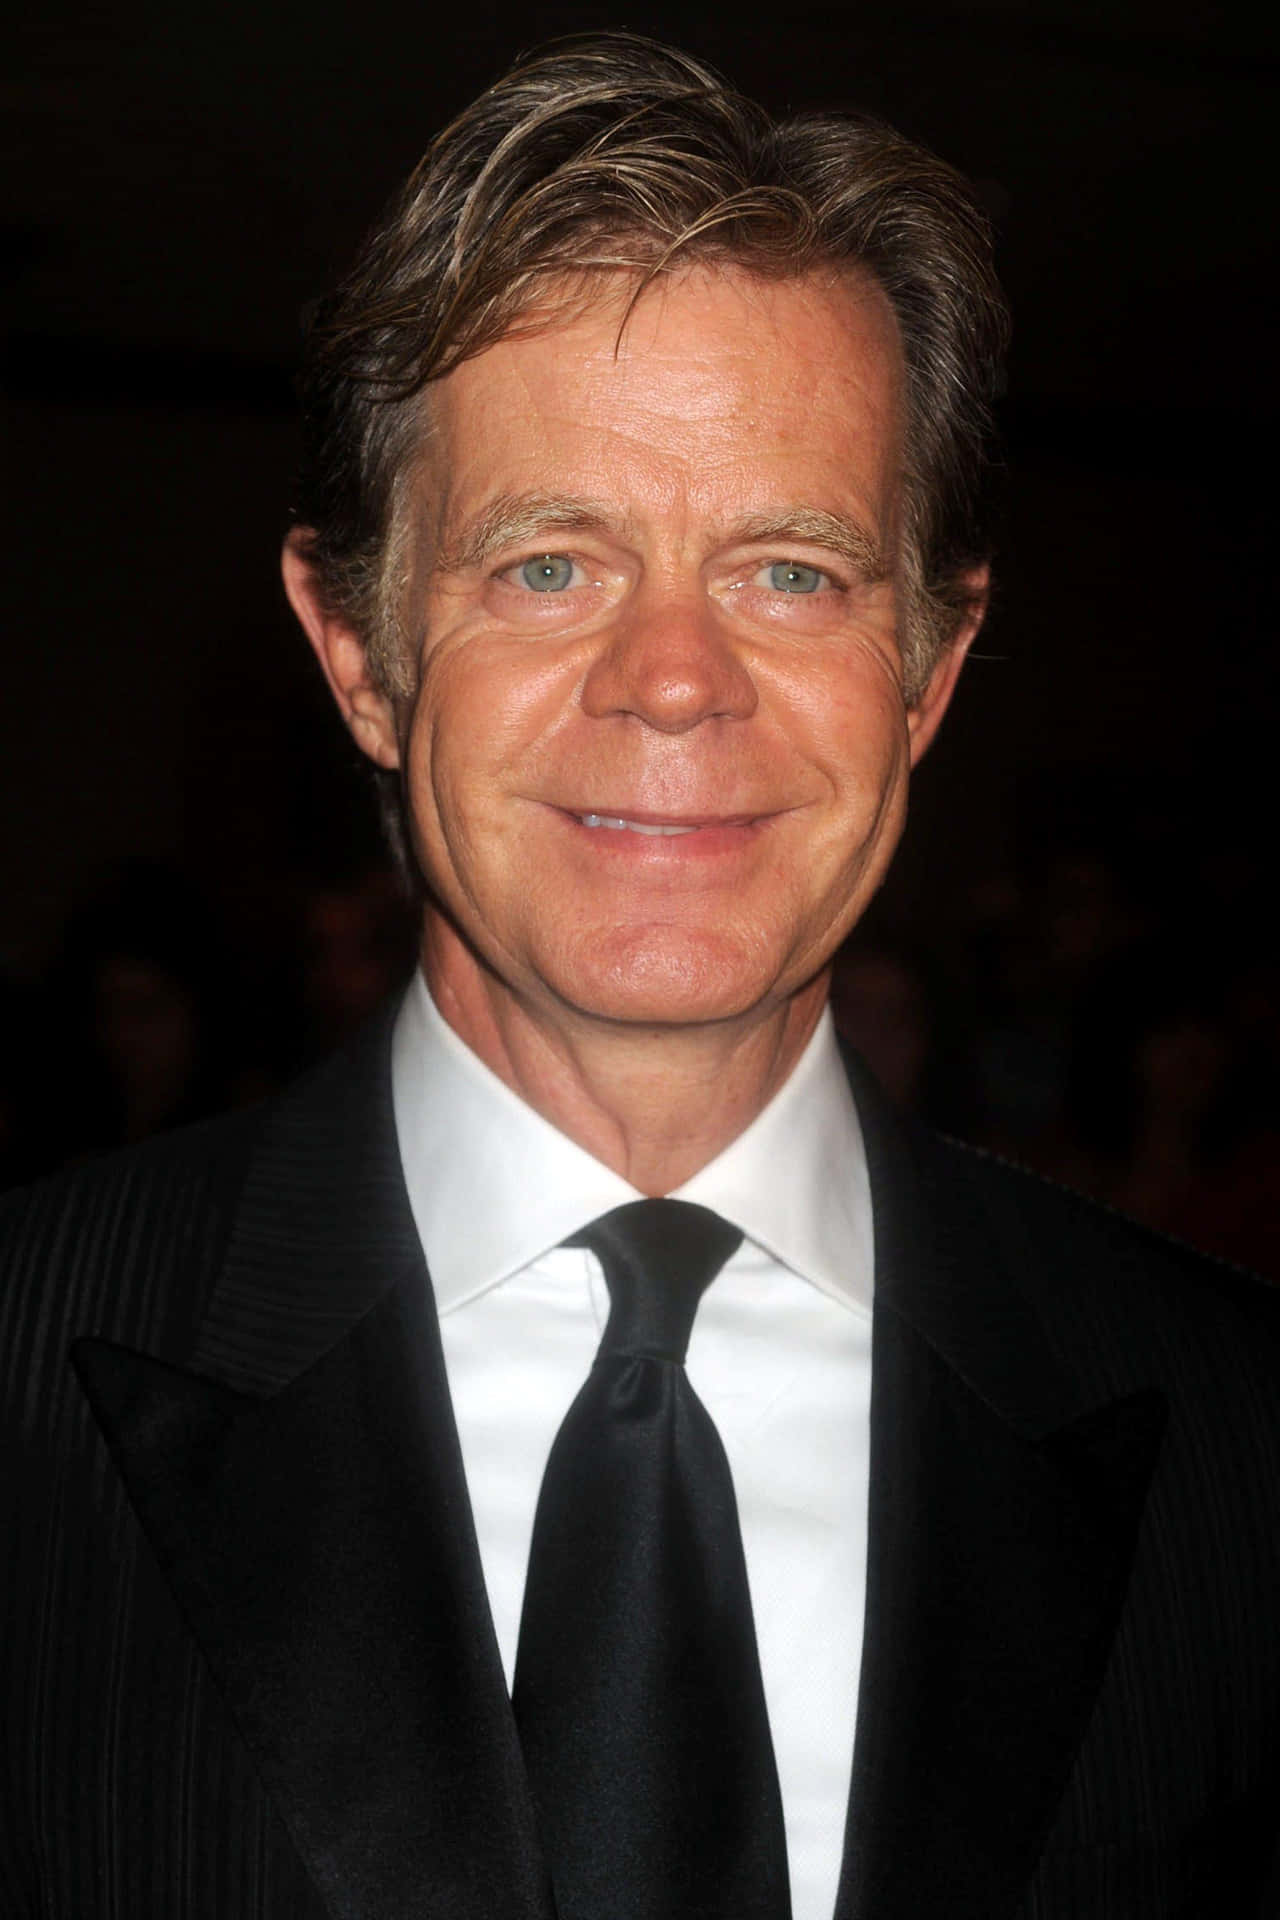 William H. Macy Posing At A Red Carpet Event Background